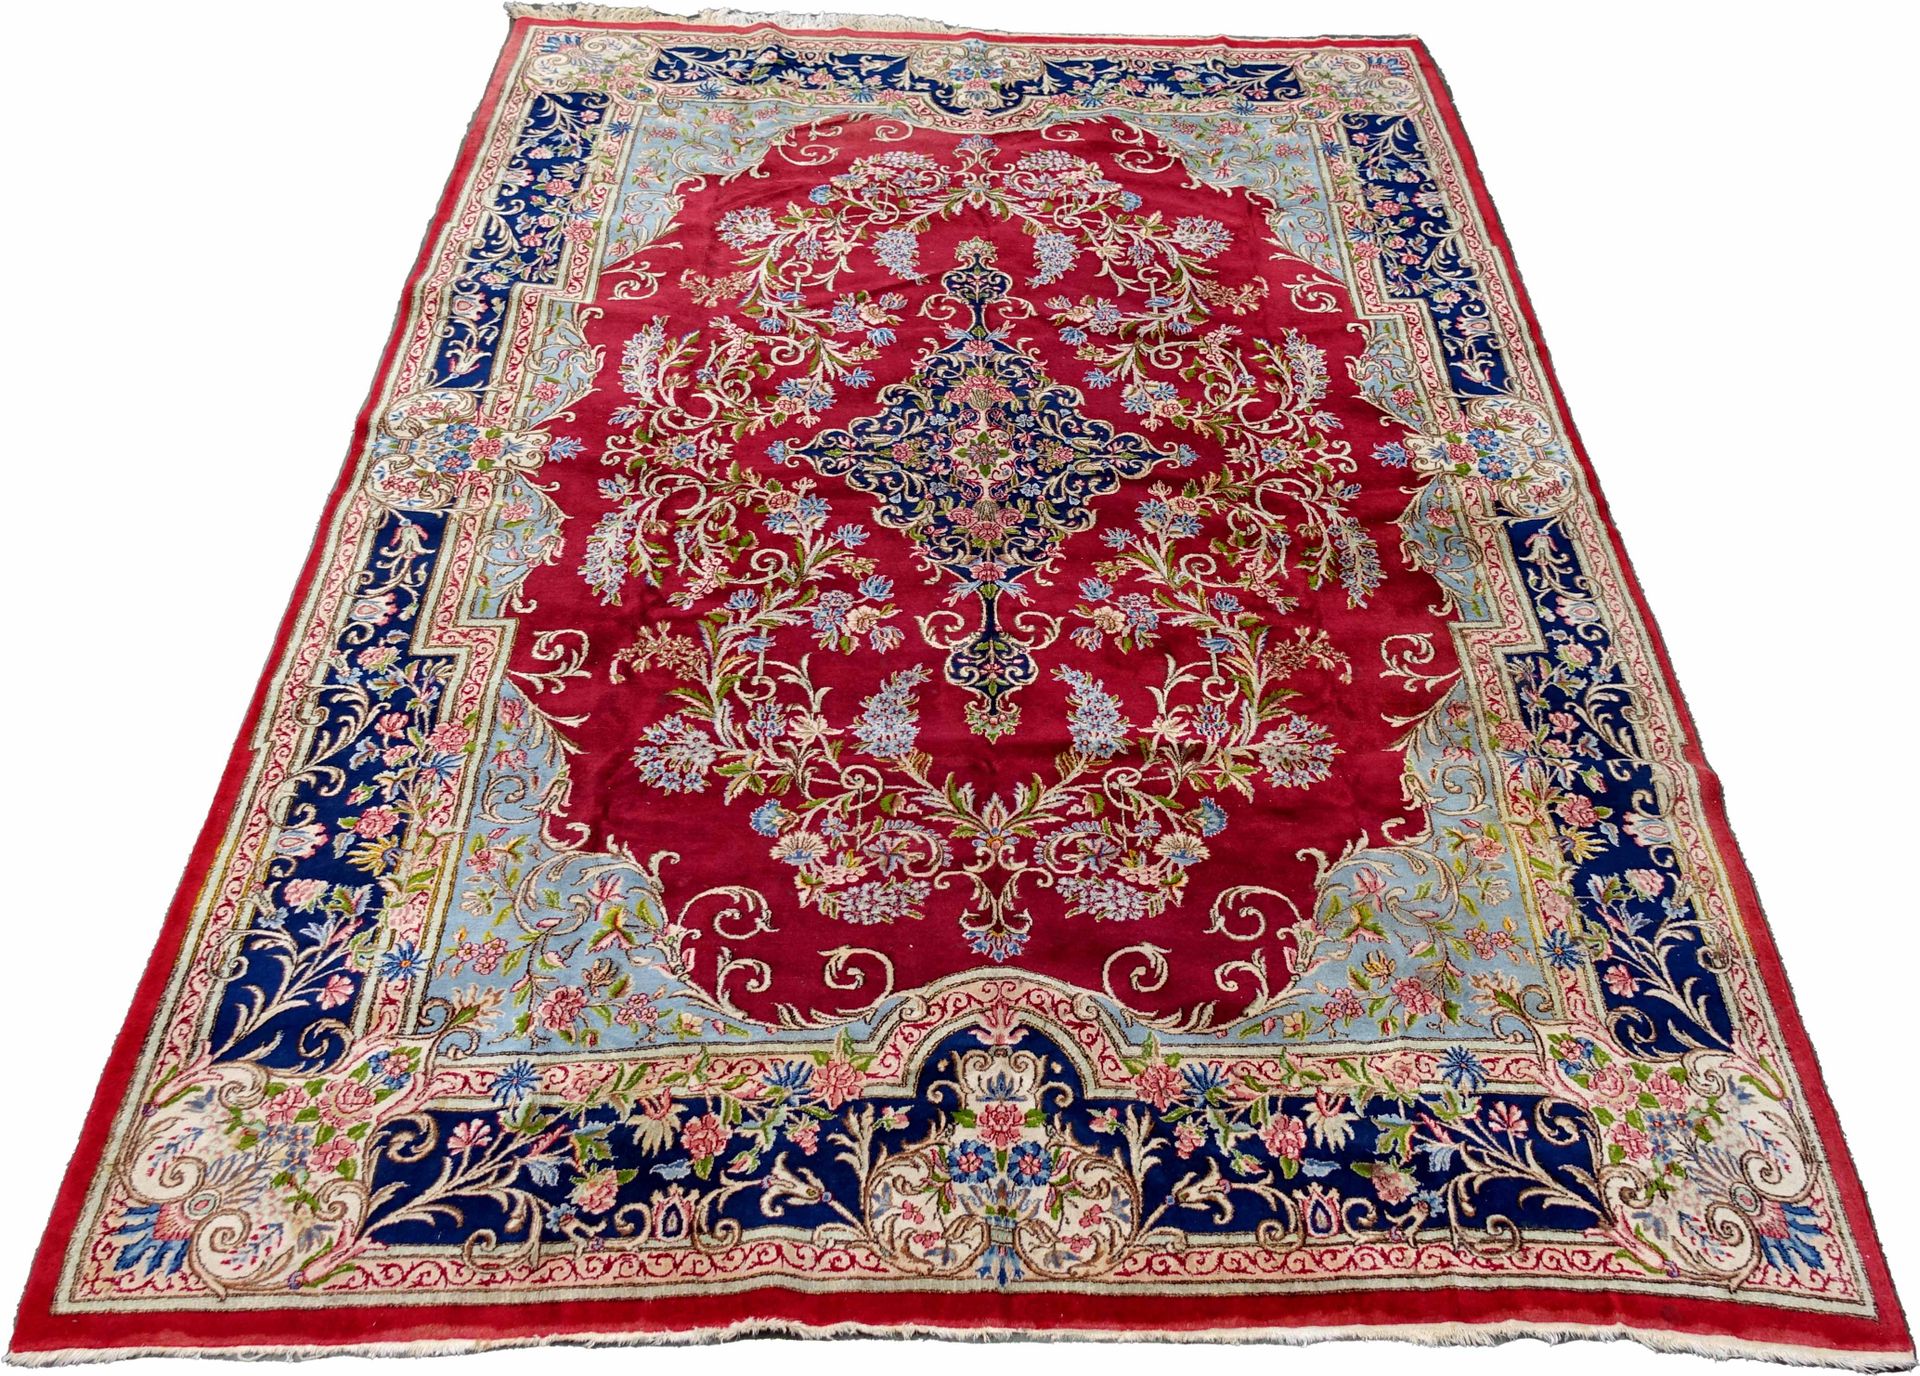 Tapis Kirman-Laver. Medallion with double palmette surrounded by a crown of flow&hellip;